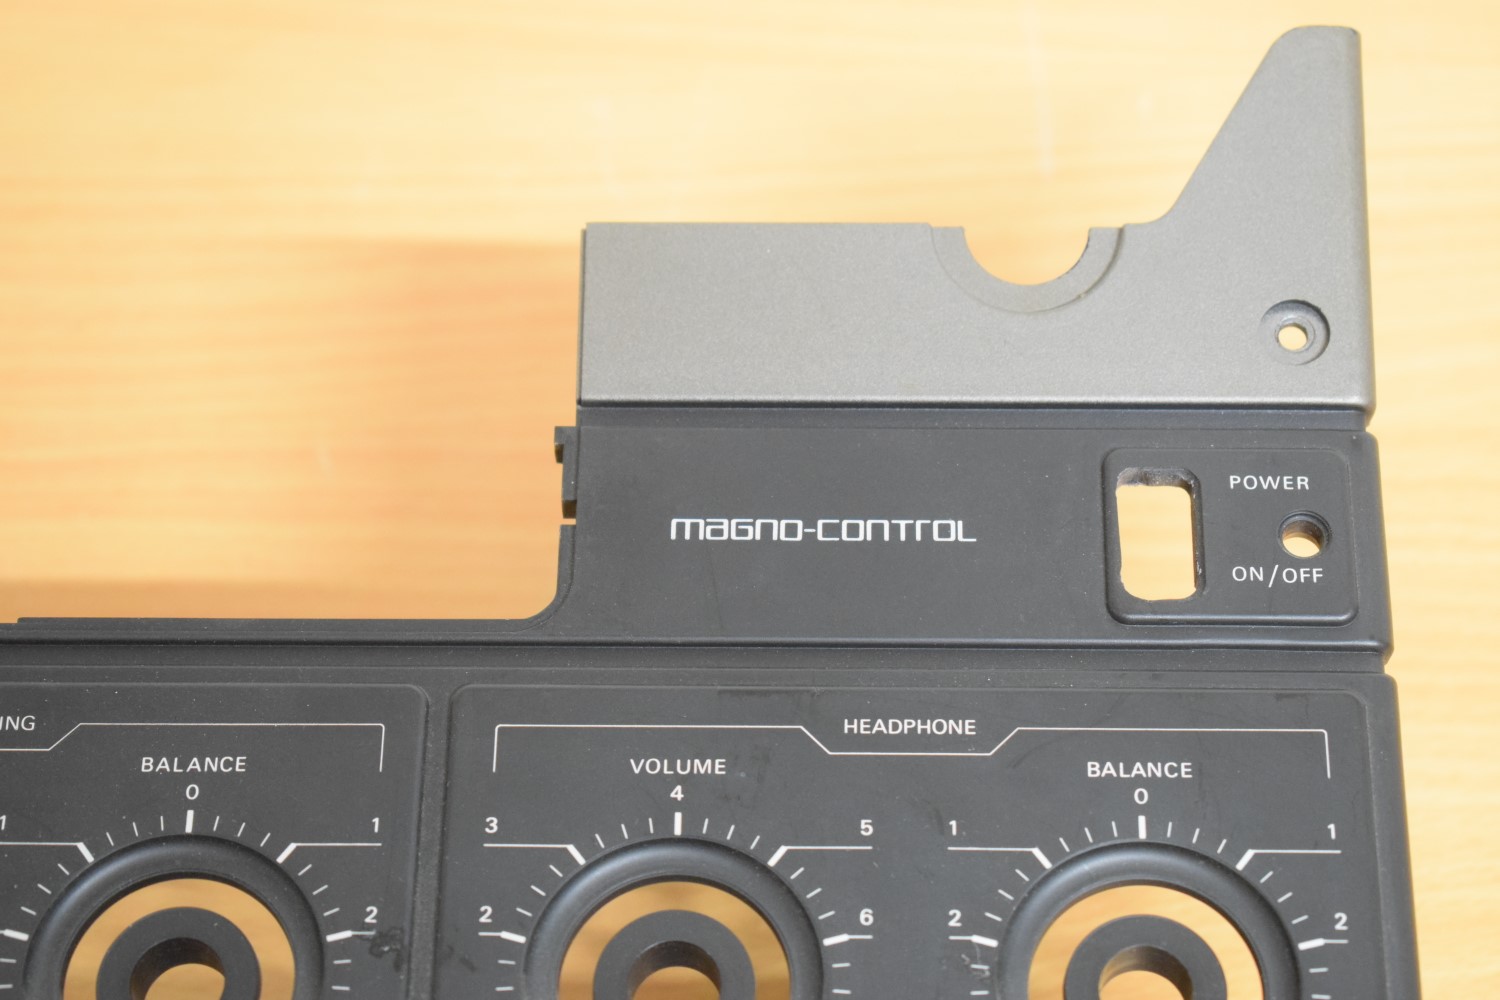 Philips N4504 Tape Recorder - lower part front plate 